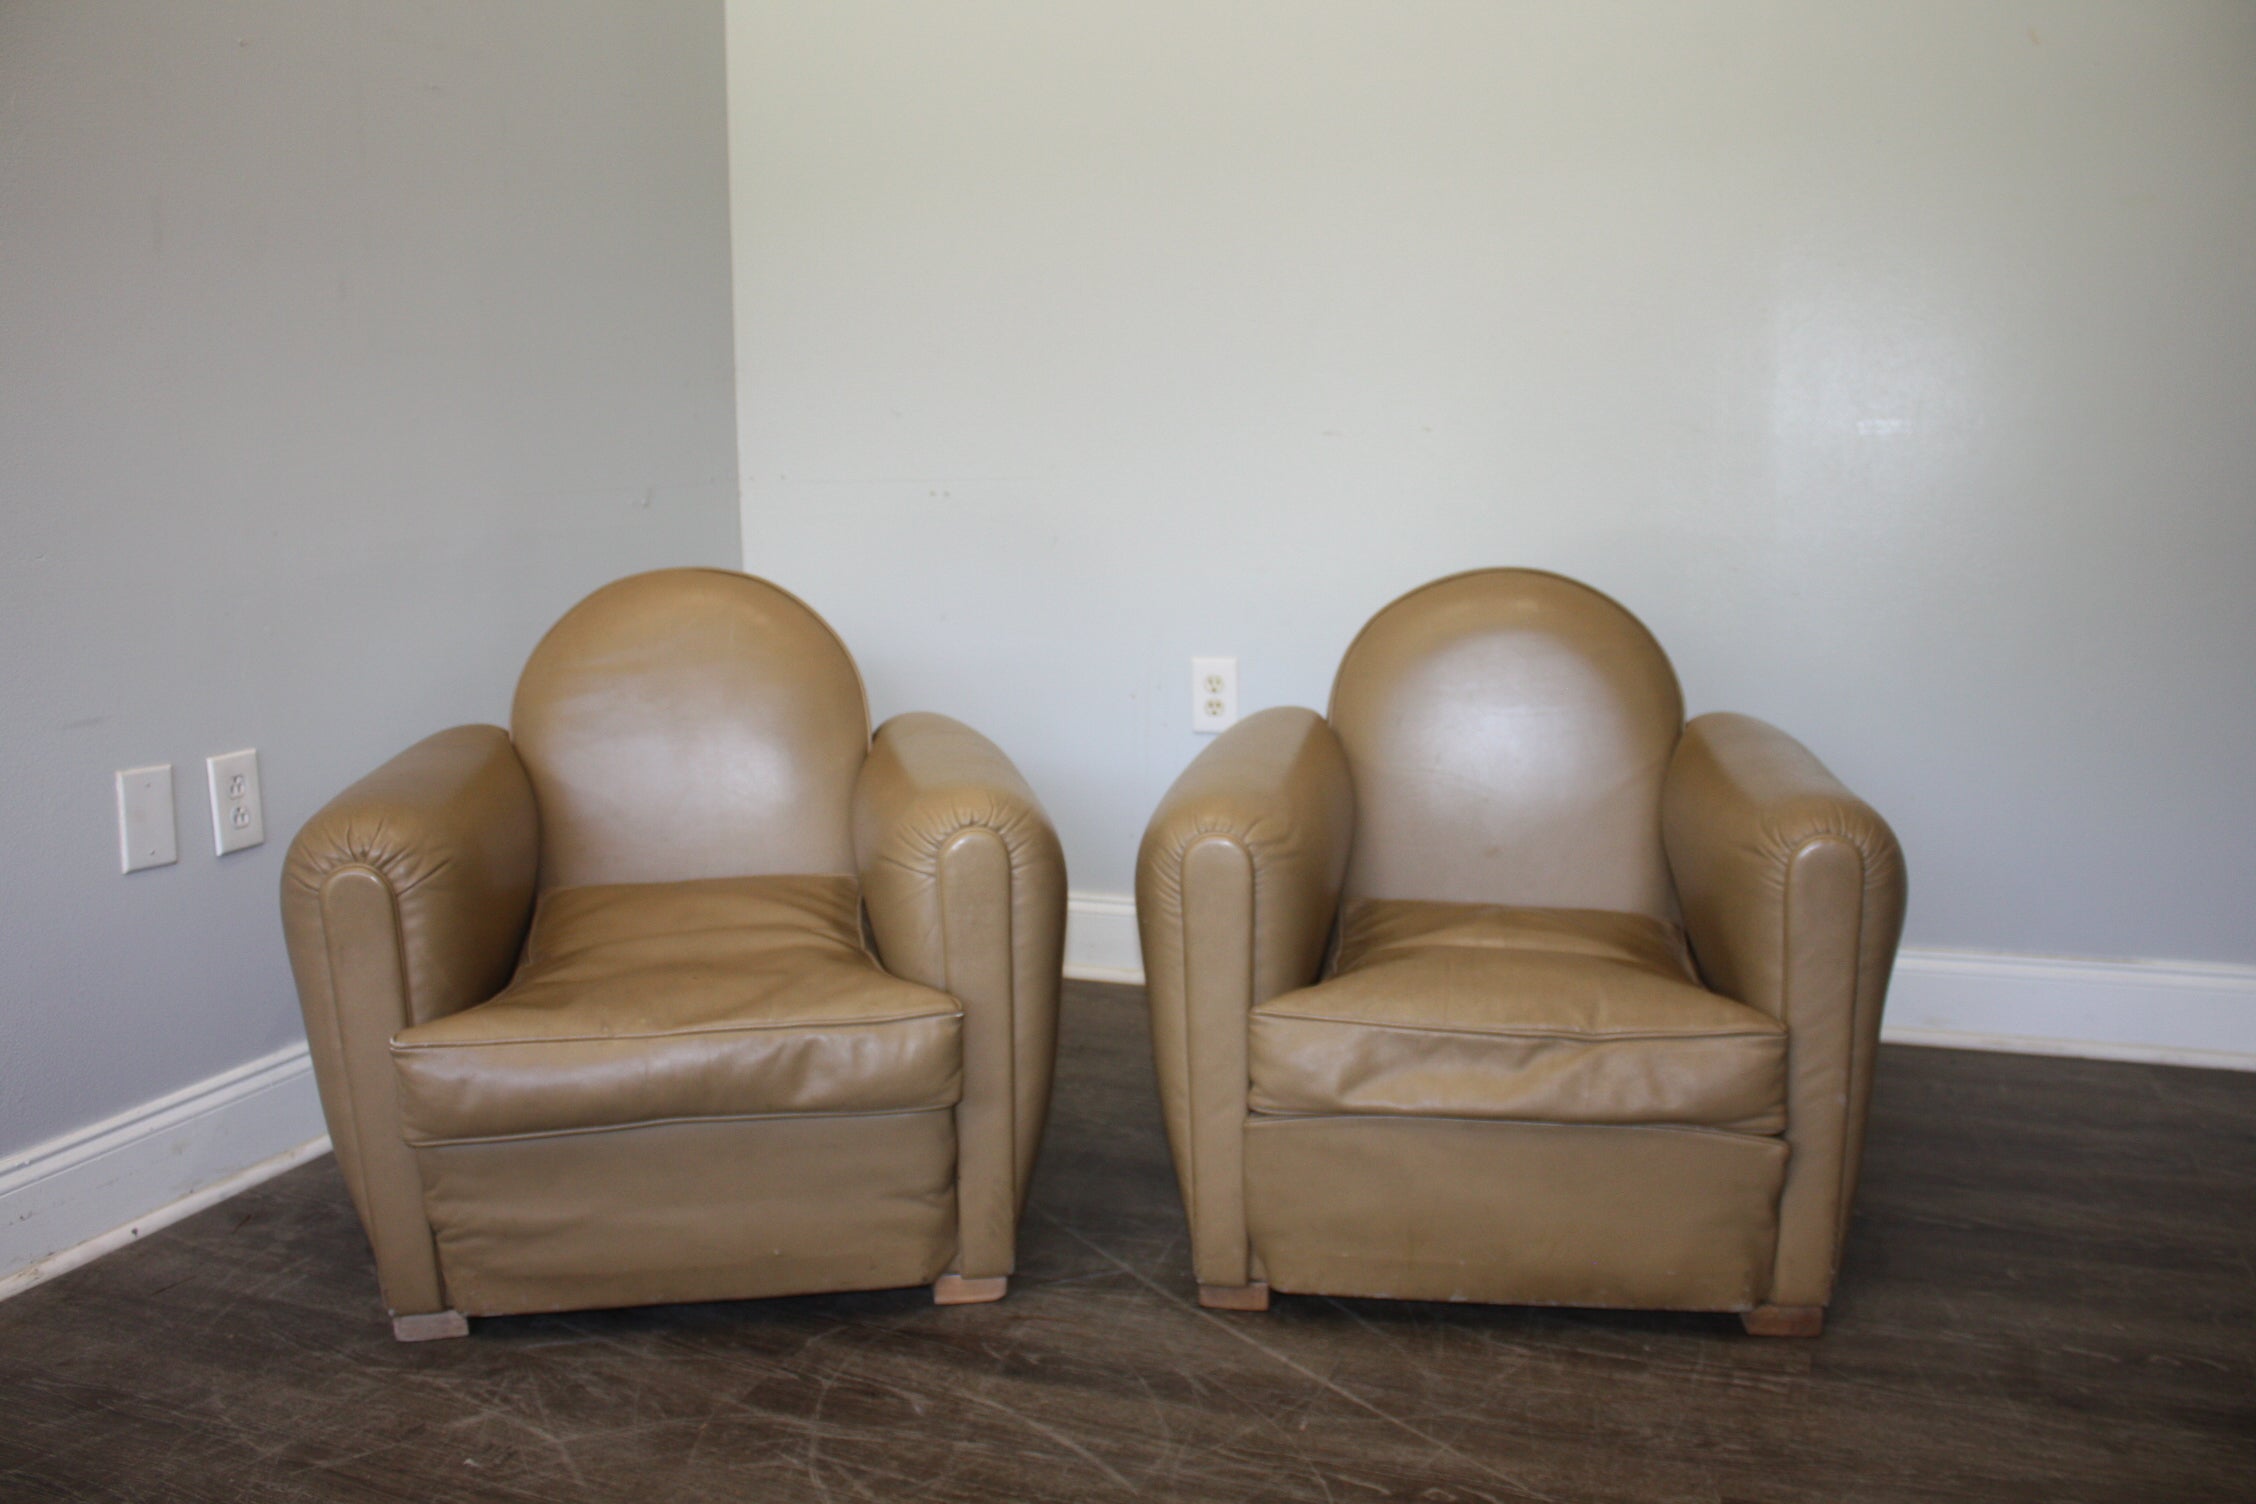 Those Club Chairs are small, ideal for a small room, very confortable and is made of beige/grey color leather.